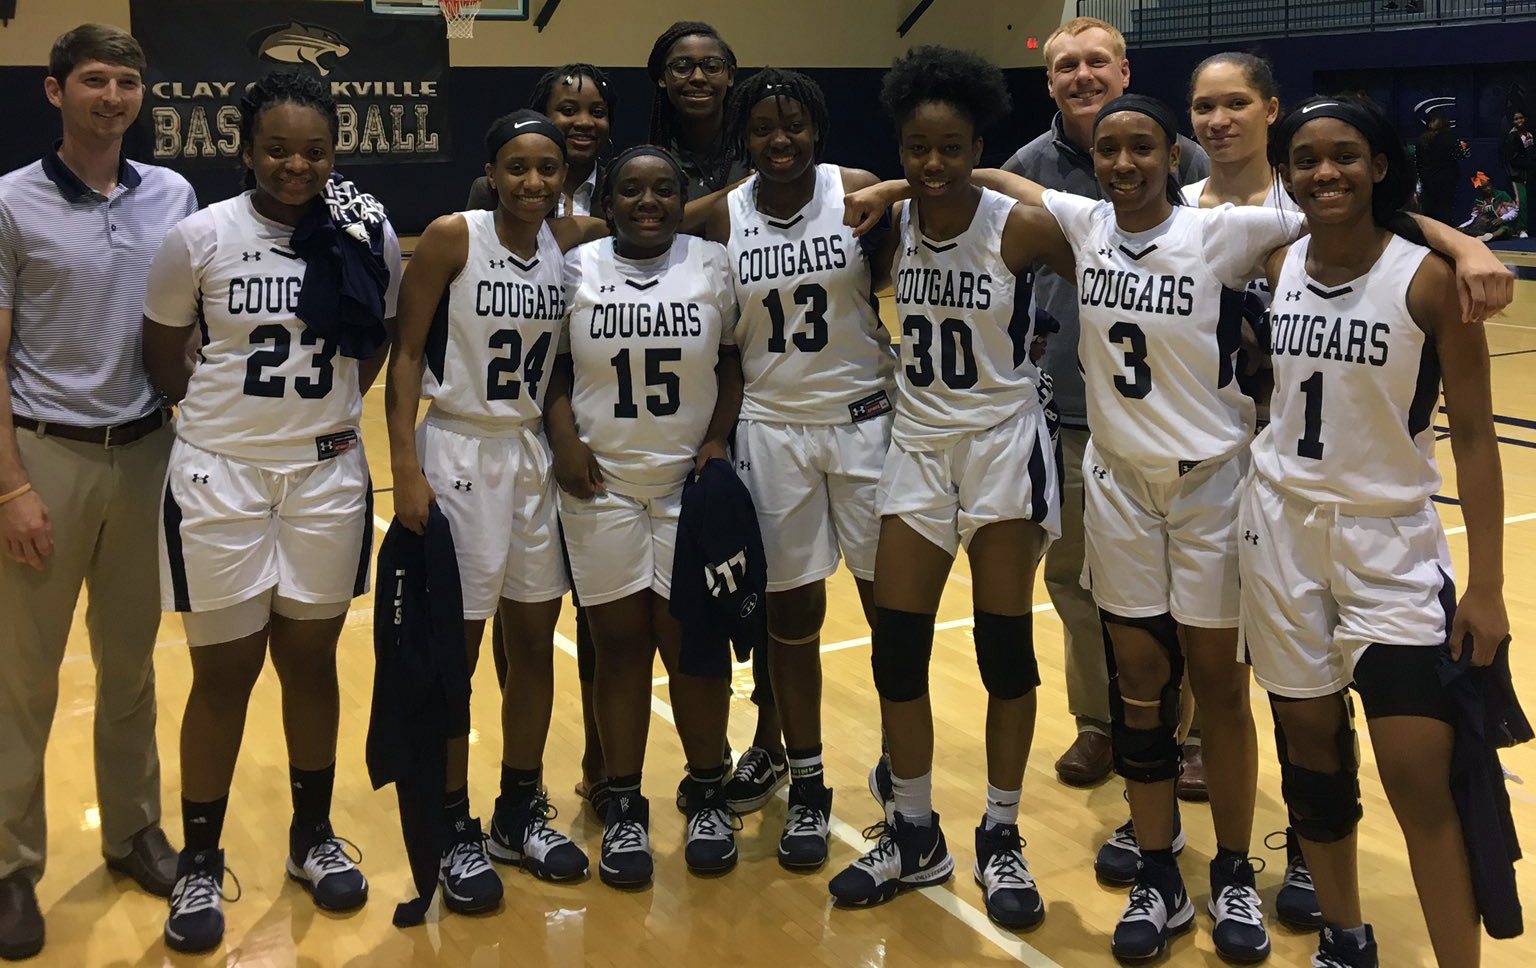 Clay-Chalkville advances into Sweet 16 after cruising past Huffman in first round